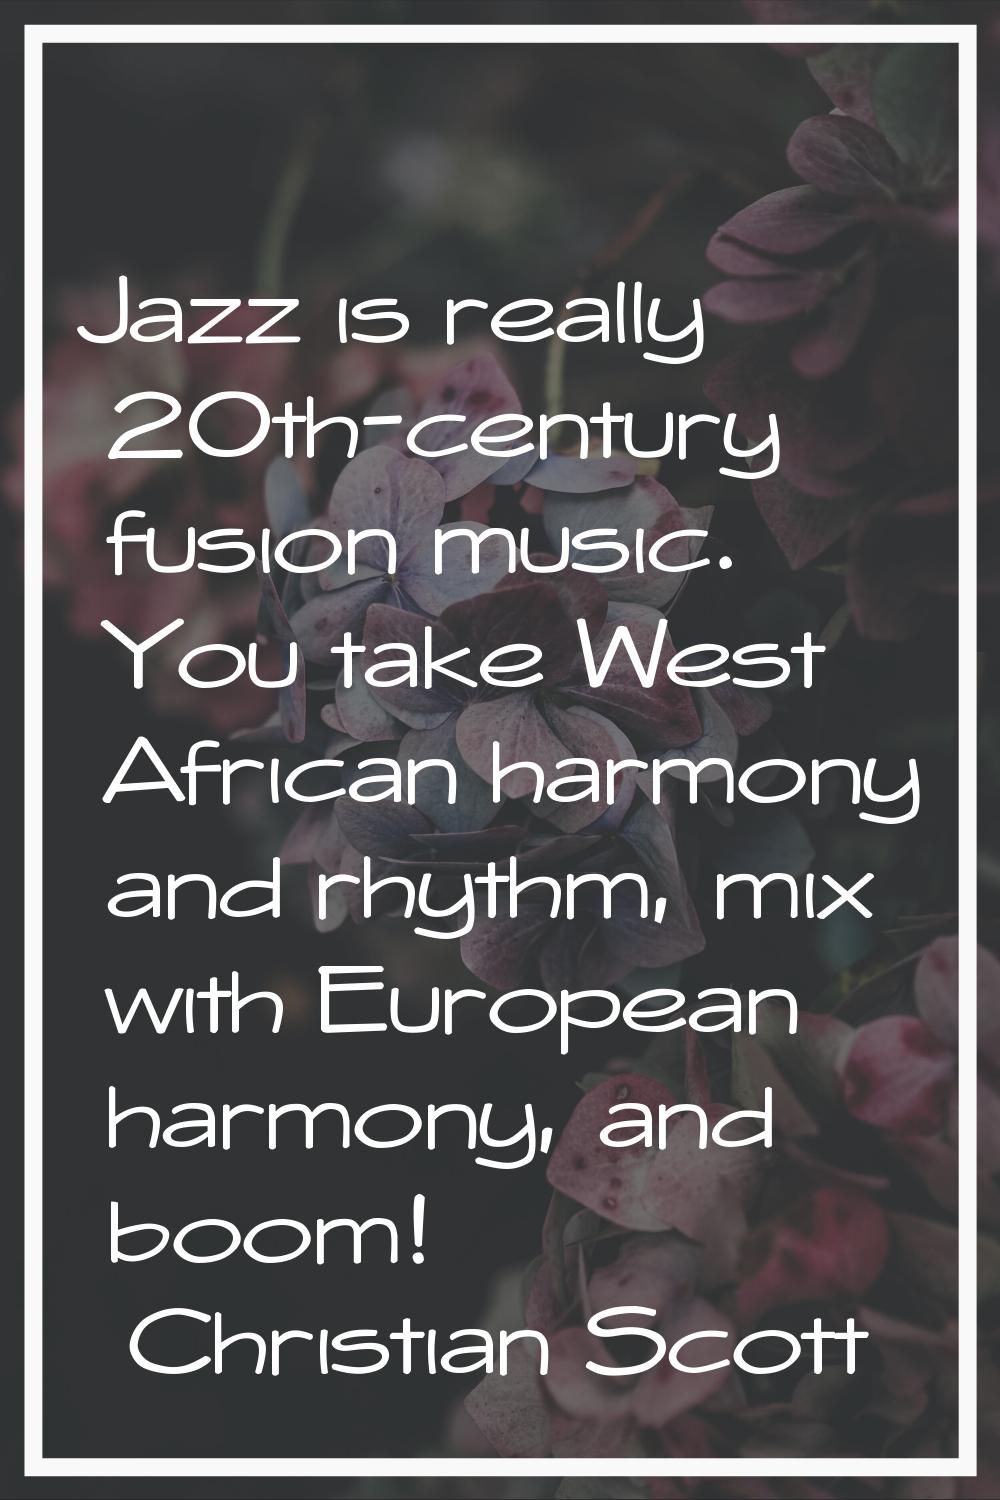 Jazz is really 20th-century fusion music. You take West African harmony and rhythm, mix with Europe